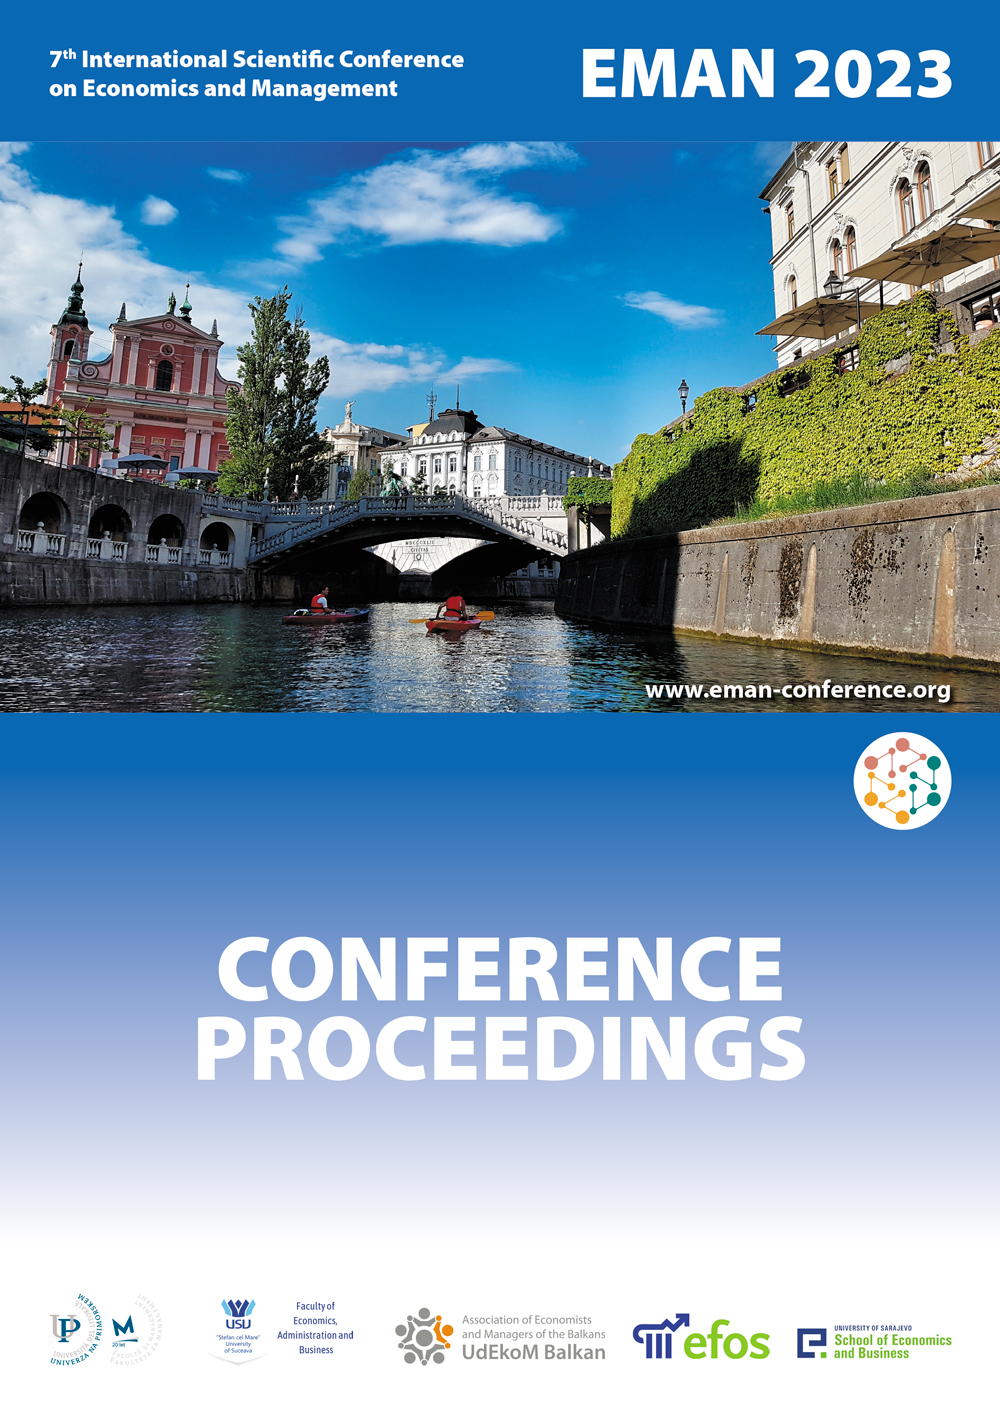 7th International Scientific Conference EMAN 2023 – Economics & Management: How to Cope with Disrupted Times, CONFERENCE PROCEEDINGS, Ljubljana, Slovenia (hybrid), March 23, 2023